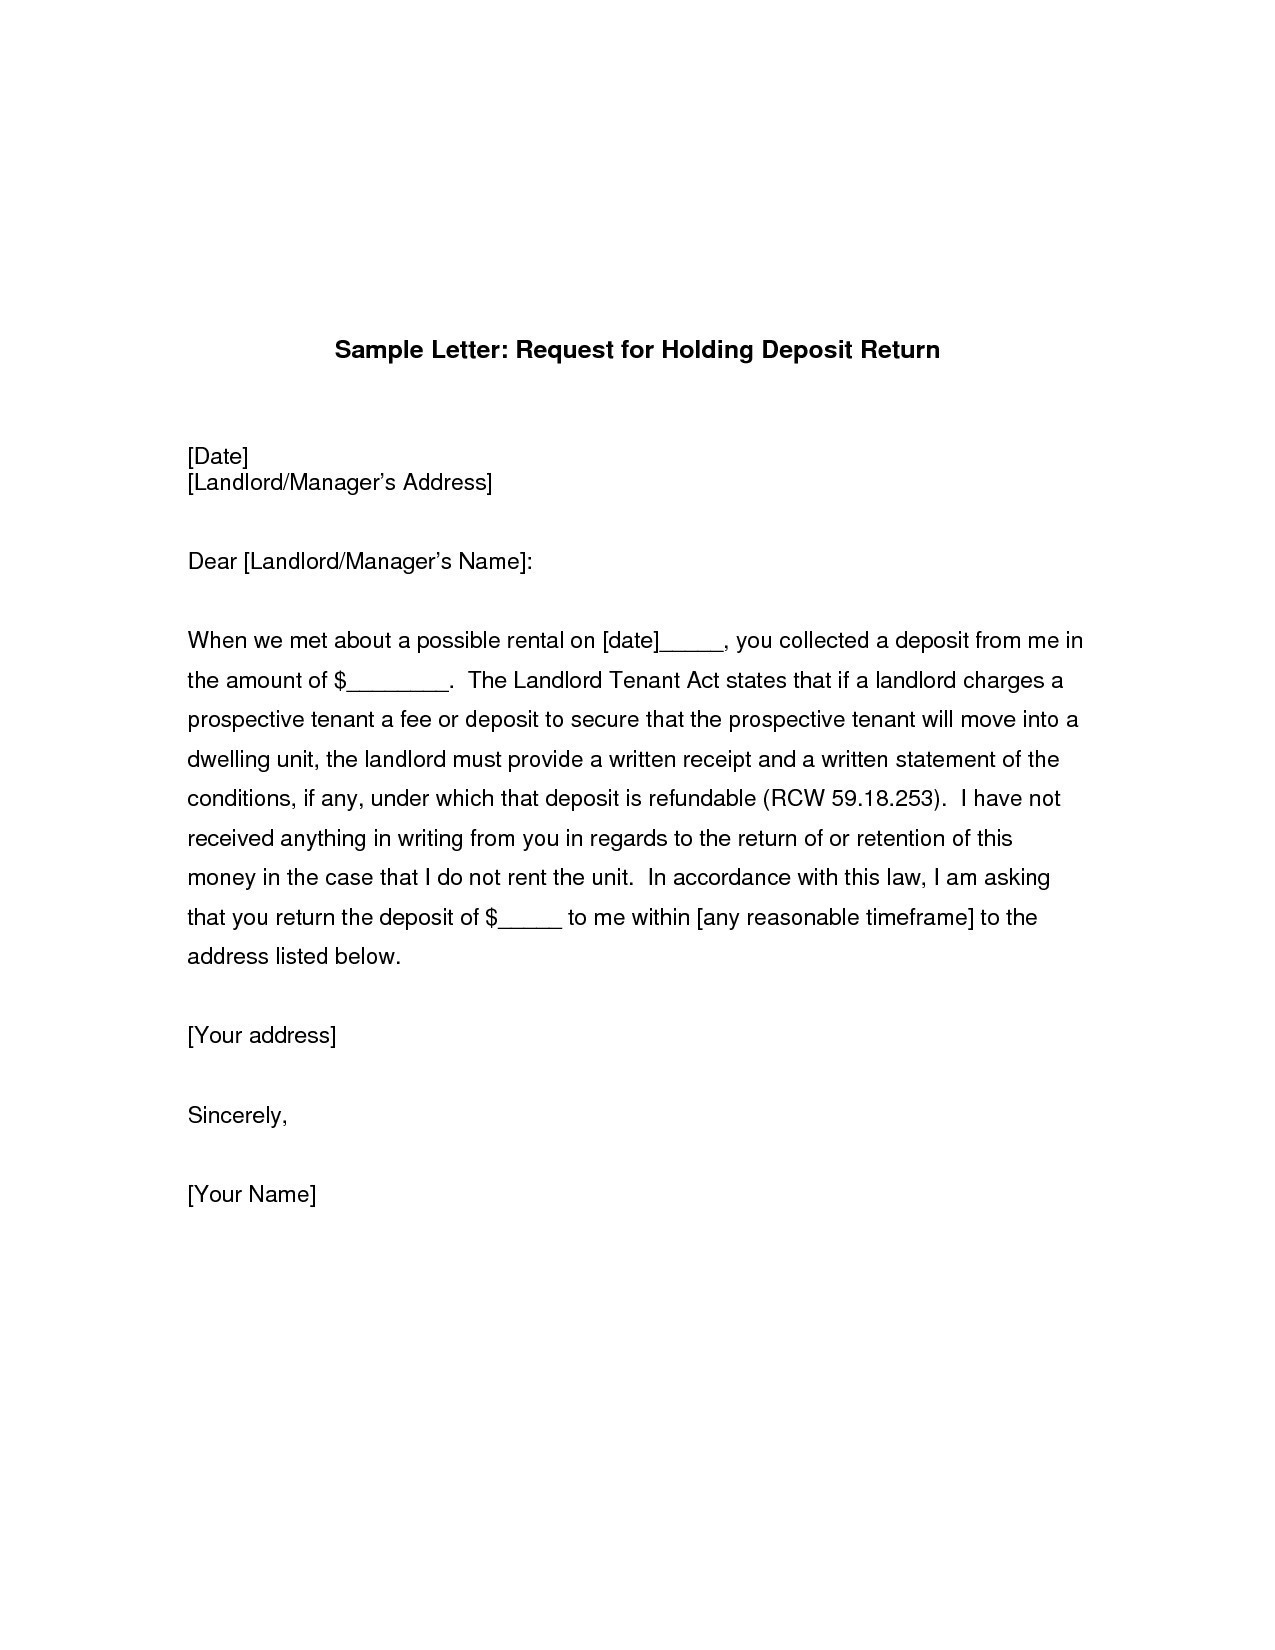 Security Deposit Demand Letter Template - New Refund Letter Best Letter format for Requesting A Refund Best